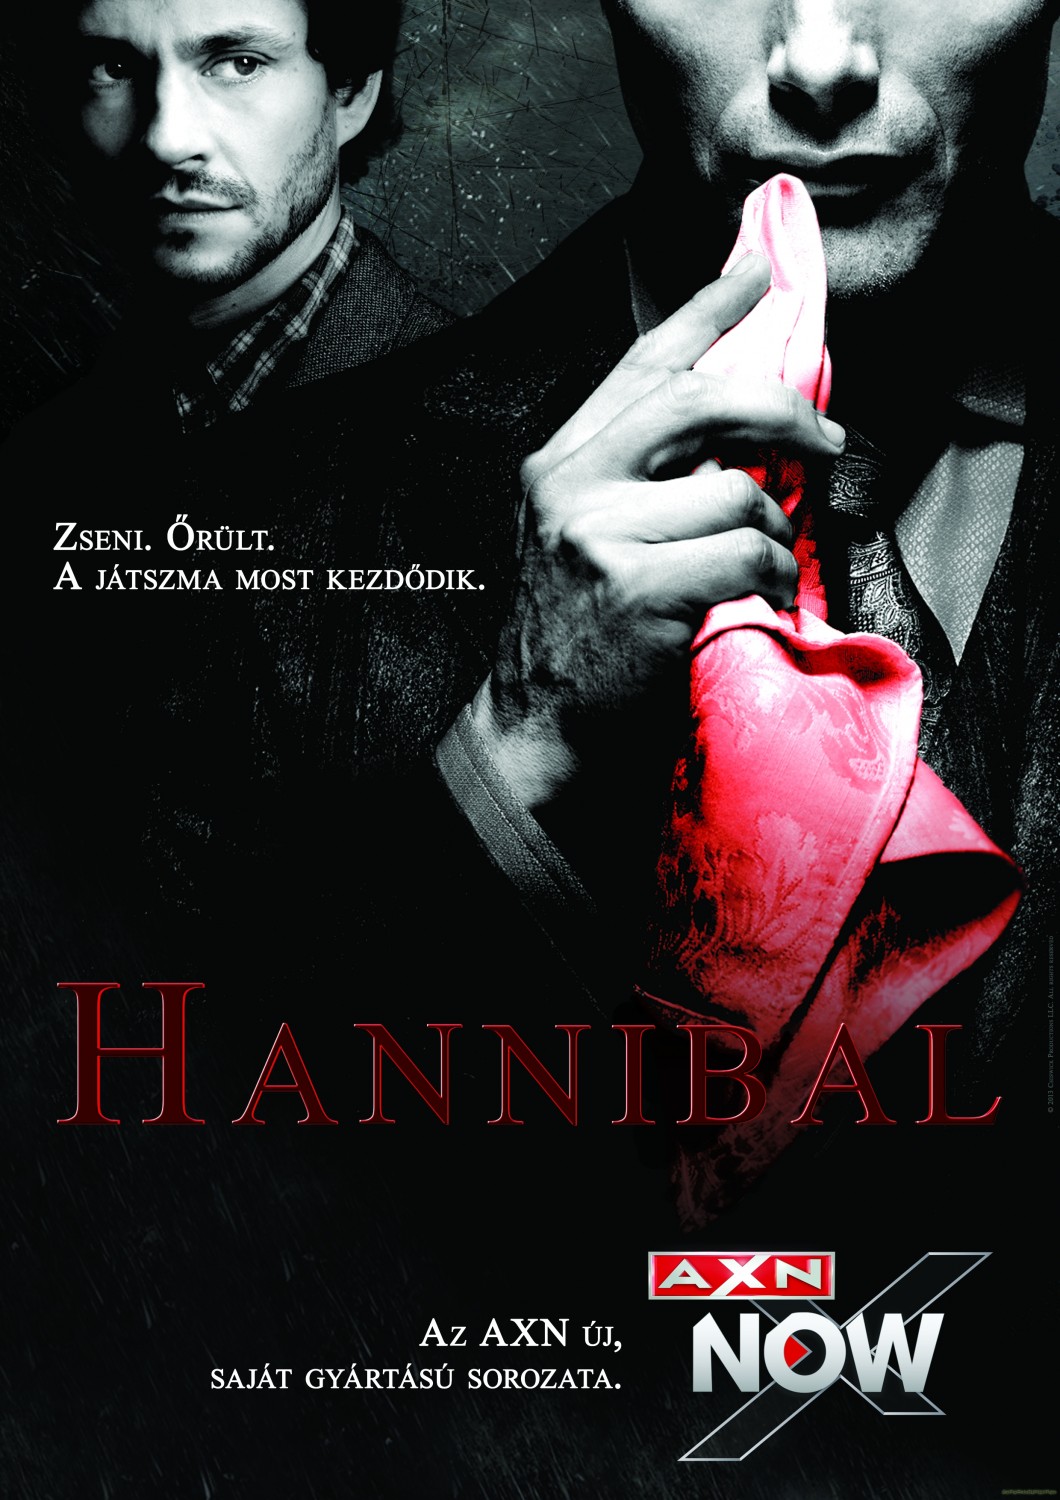 Extra Large TV Poster Image for Hannibal (#4 of 12)